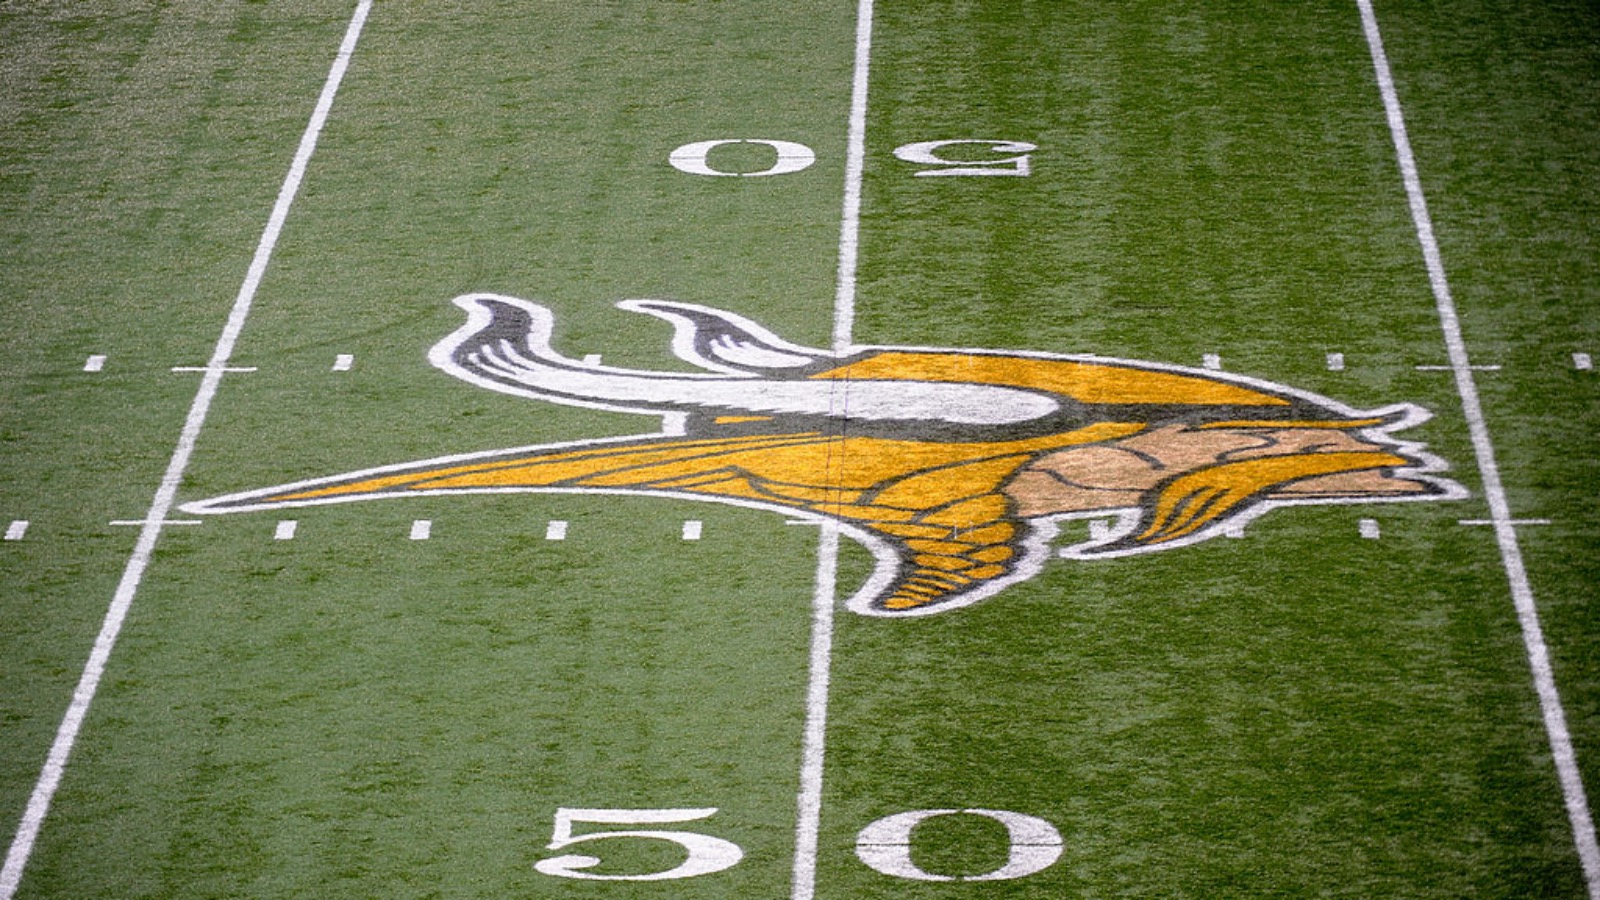 NFL Prediction: The Minnesota Vikings Won't Make The Playoffs After Winning 13 Games Last Year